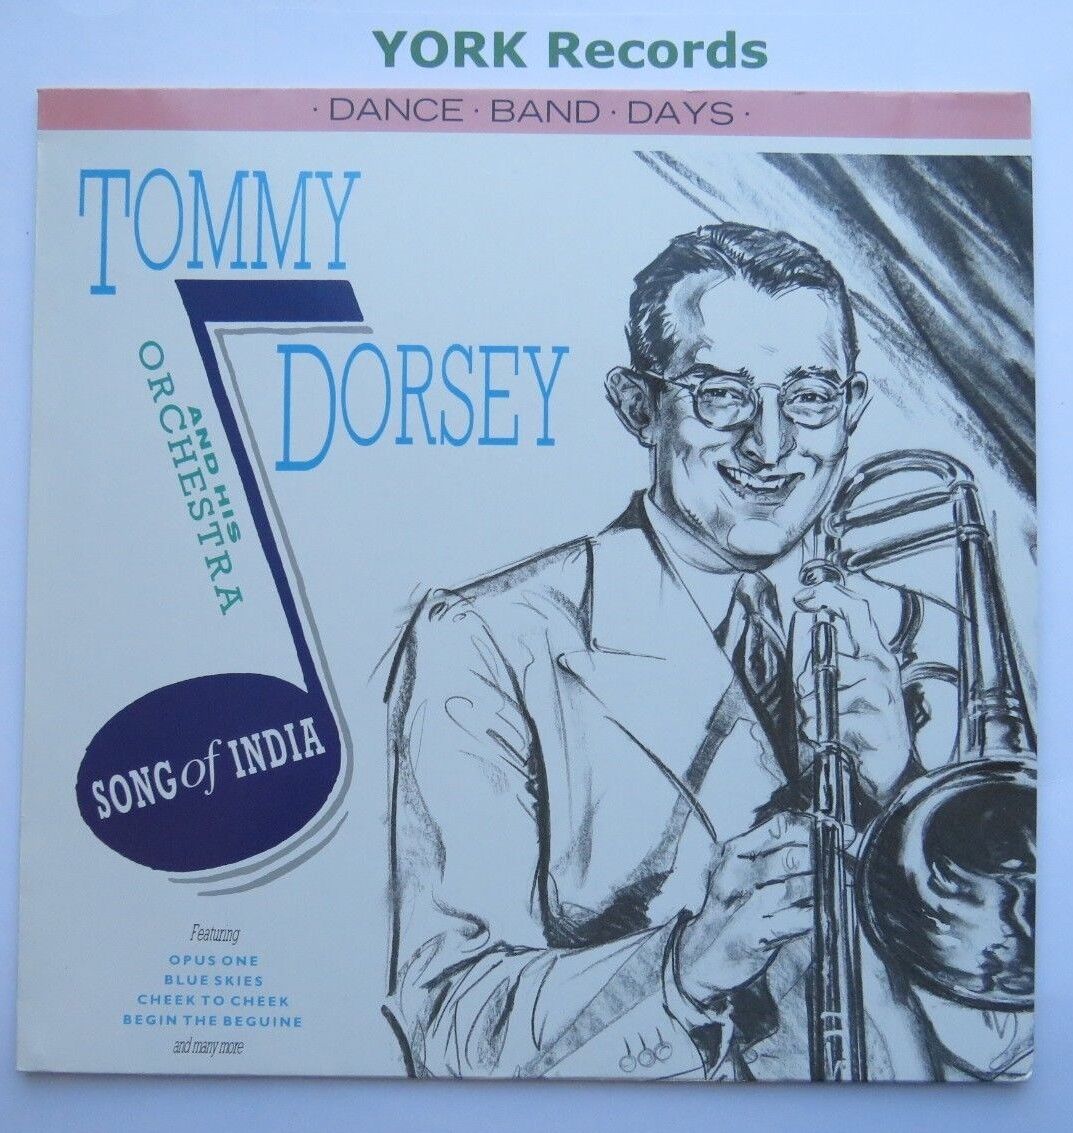 TOMMY DORSEY & HIS ORCHESTRA - Song Of India - Ex Con LP Record Dance Dand Days